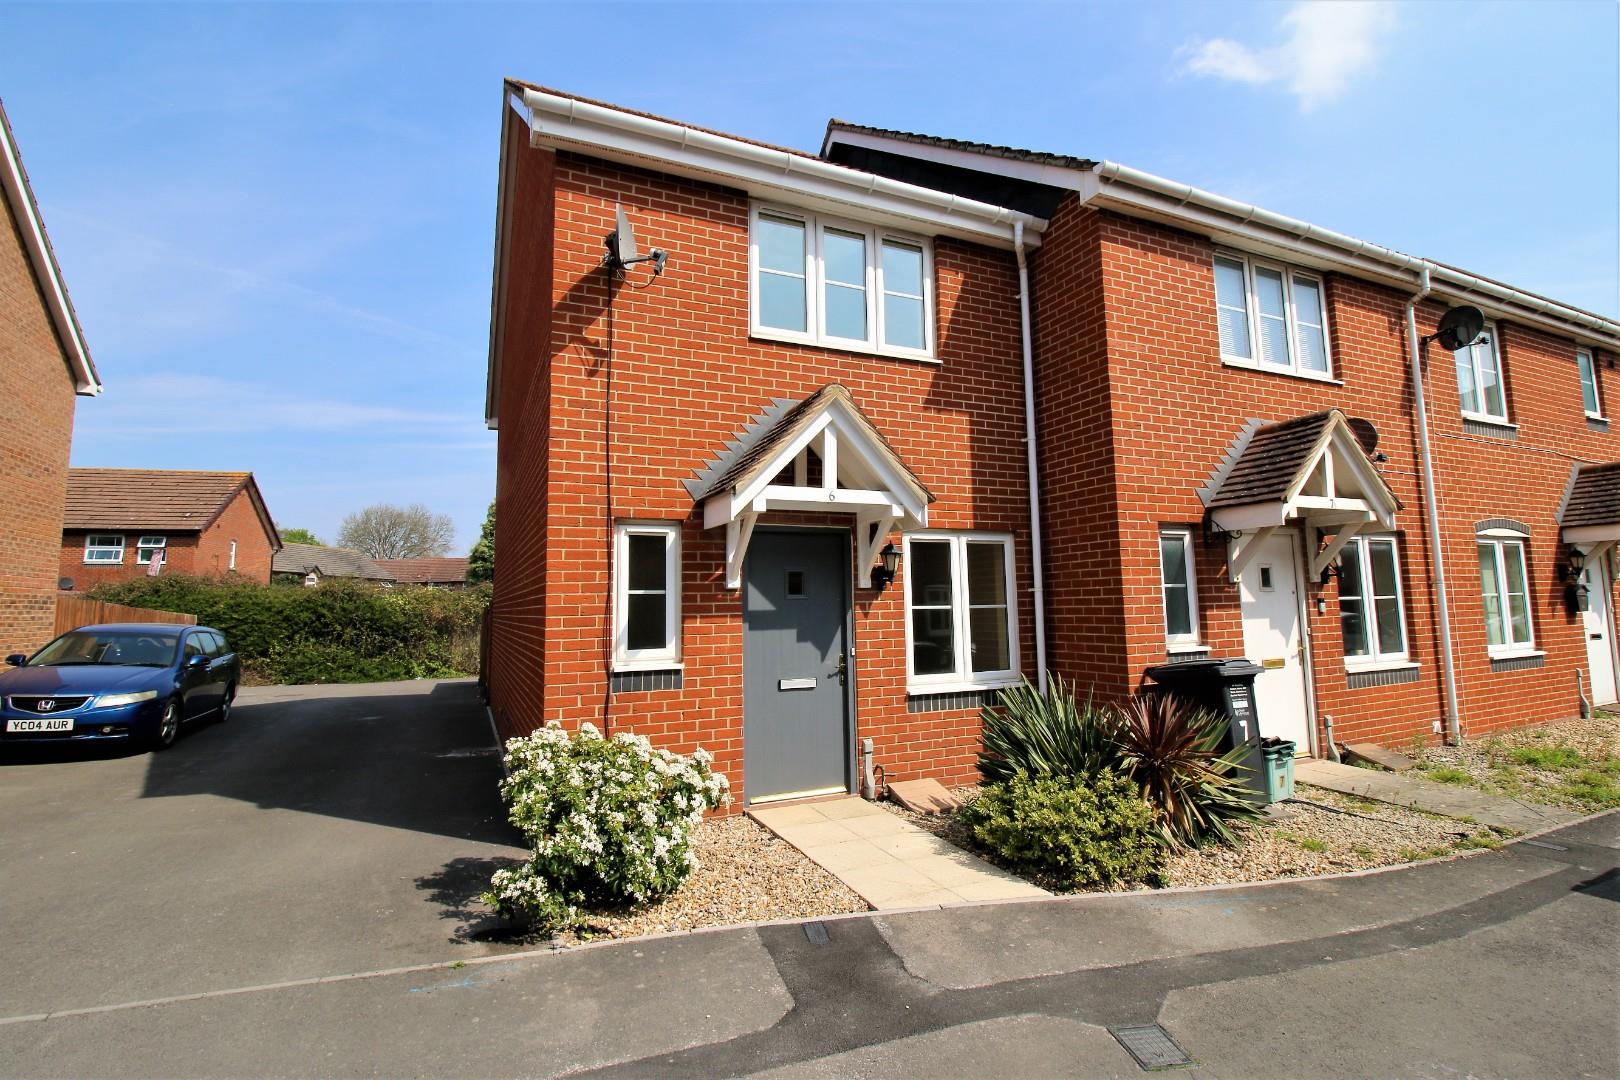 Well presented modern two bedroom house, in the village of Yatton